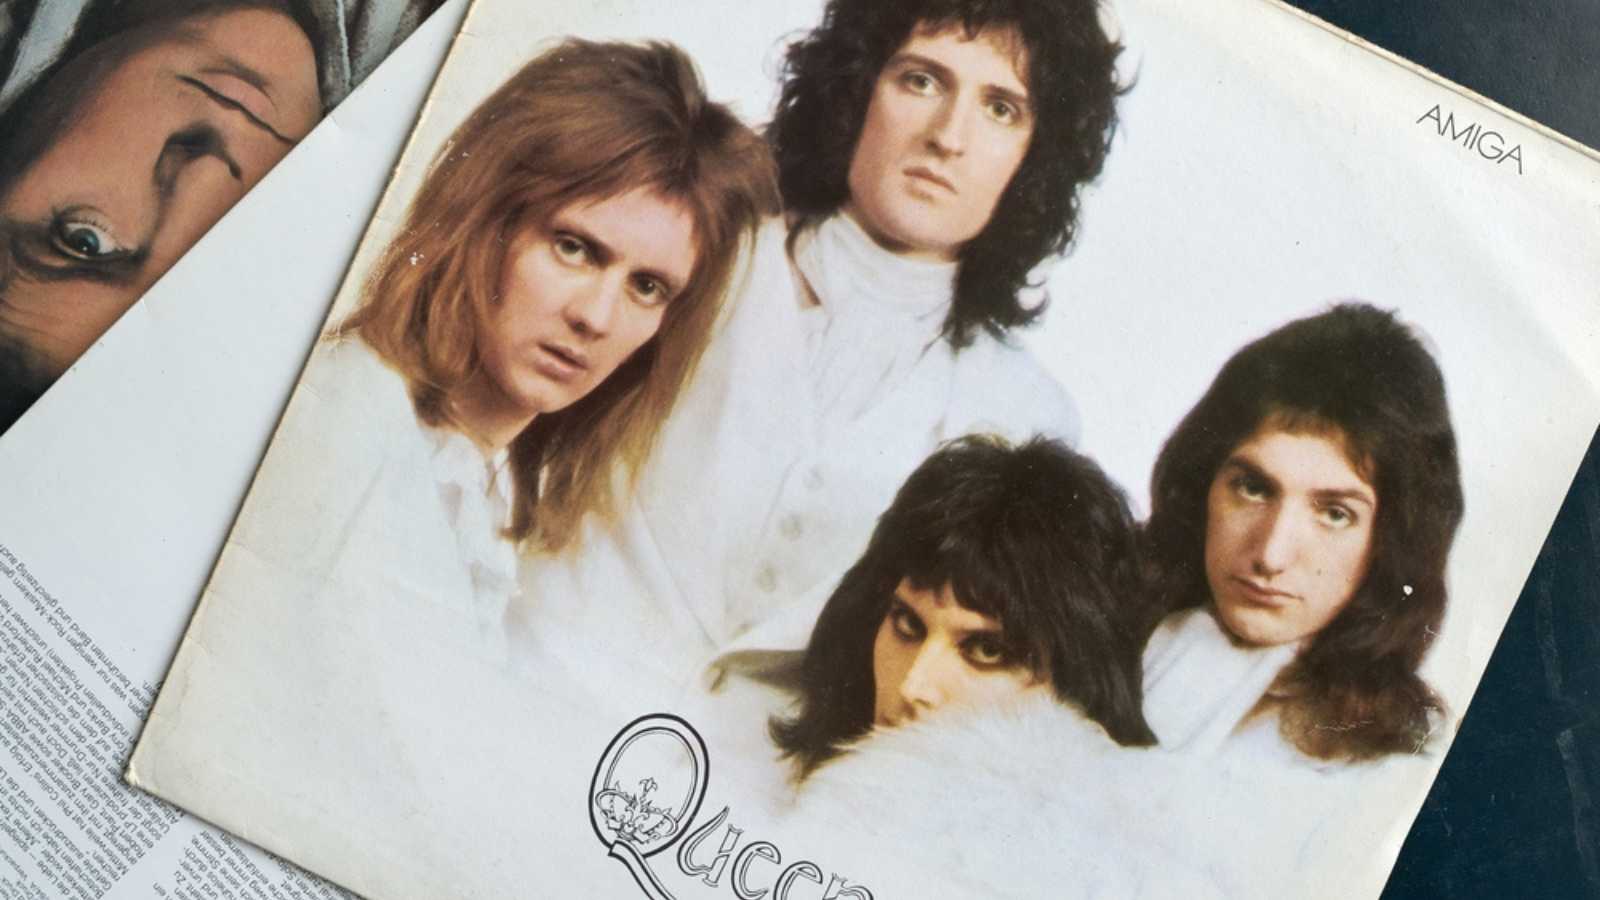 Magdeburg, Germany – January 15, 2022: Record cover of the rock band Queen, released in 1981 by the GDR record company Amiga. Amiga celebrates its 75th birthday in 2022